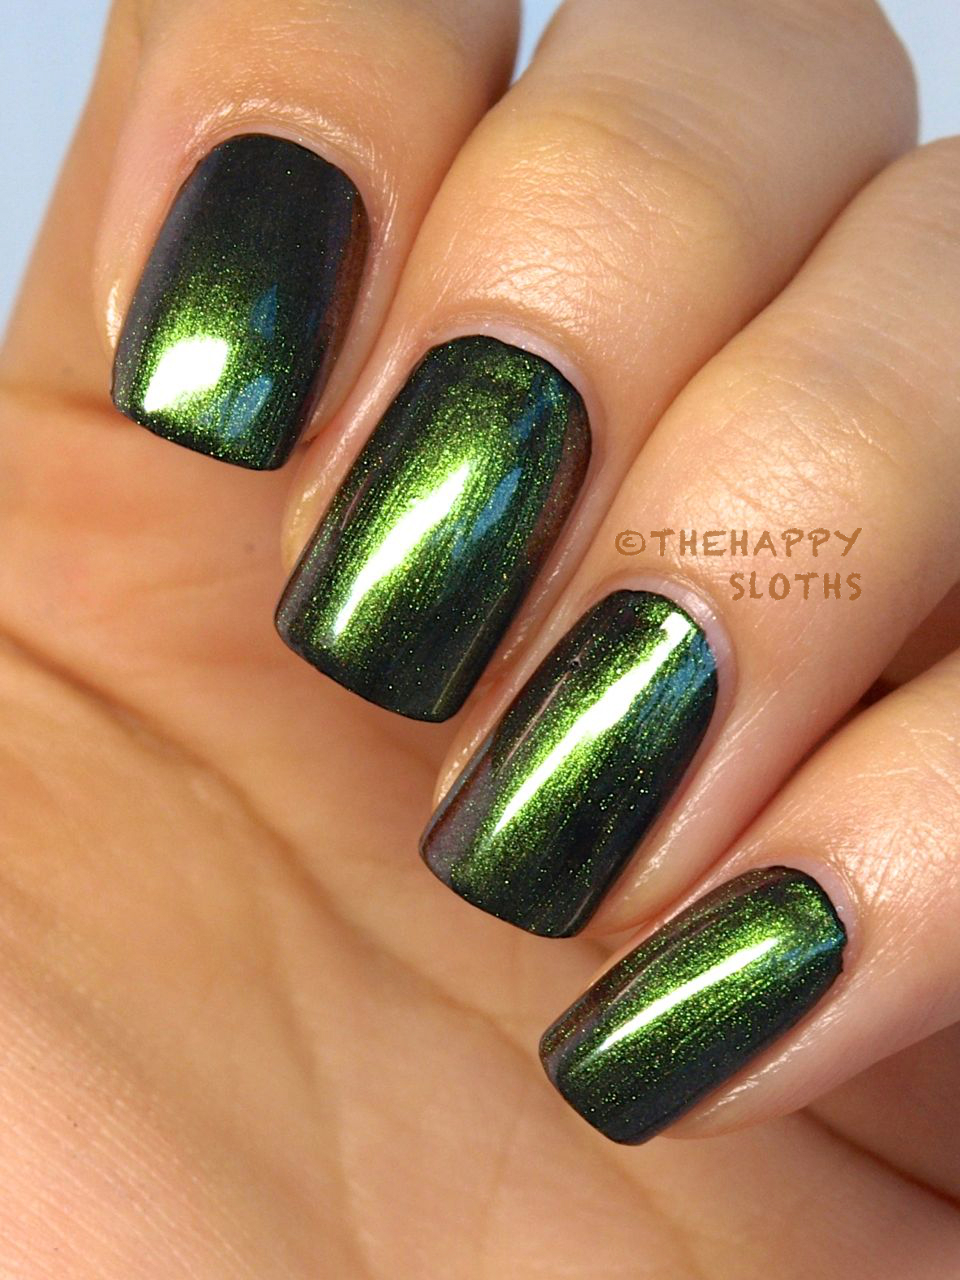 M∙A∙C Nail Transformations Nail Lacquer in "Pink Pearl" & "Green Pearl": Review and Swatches